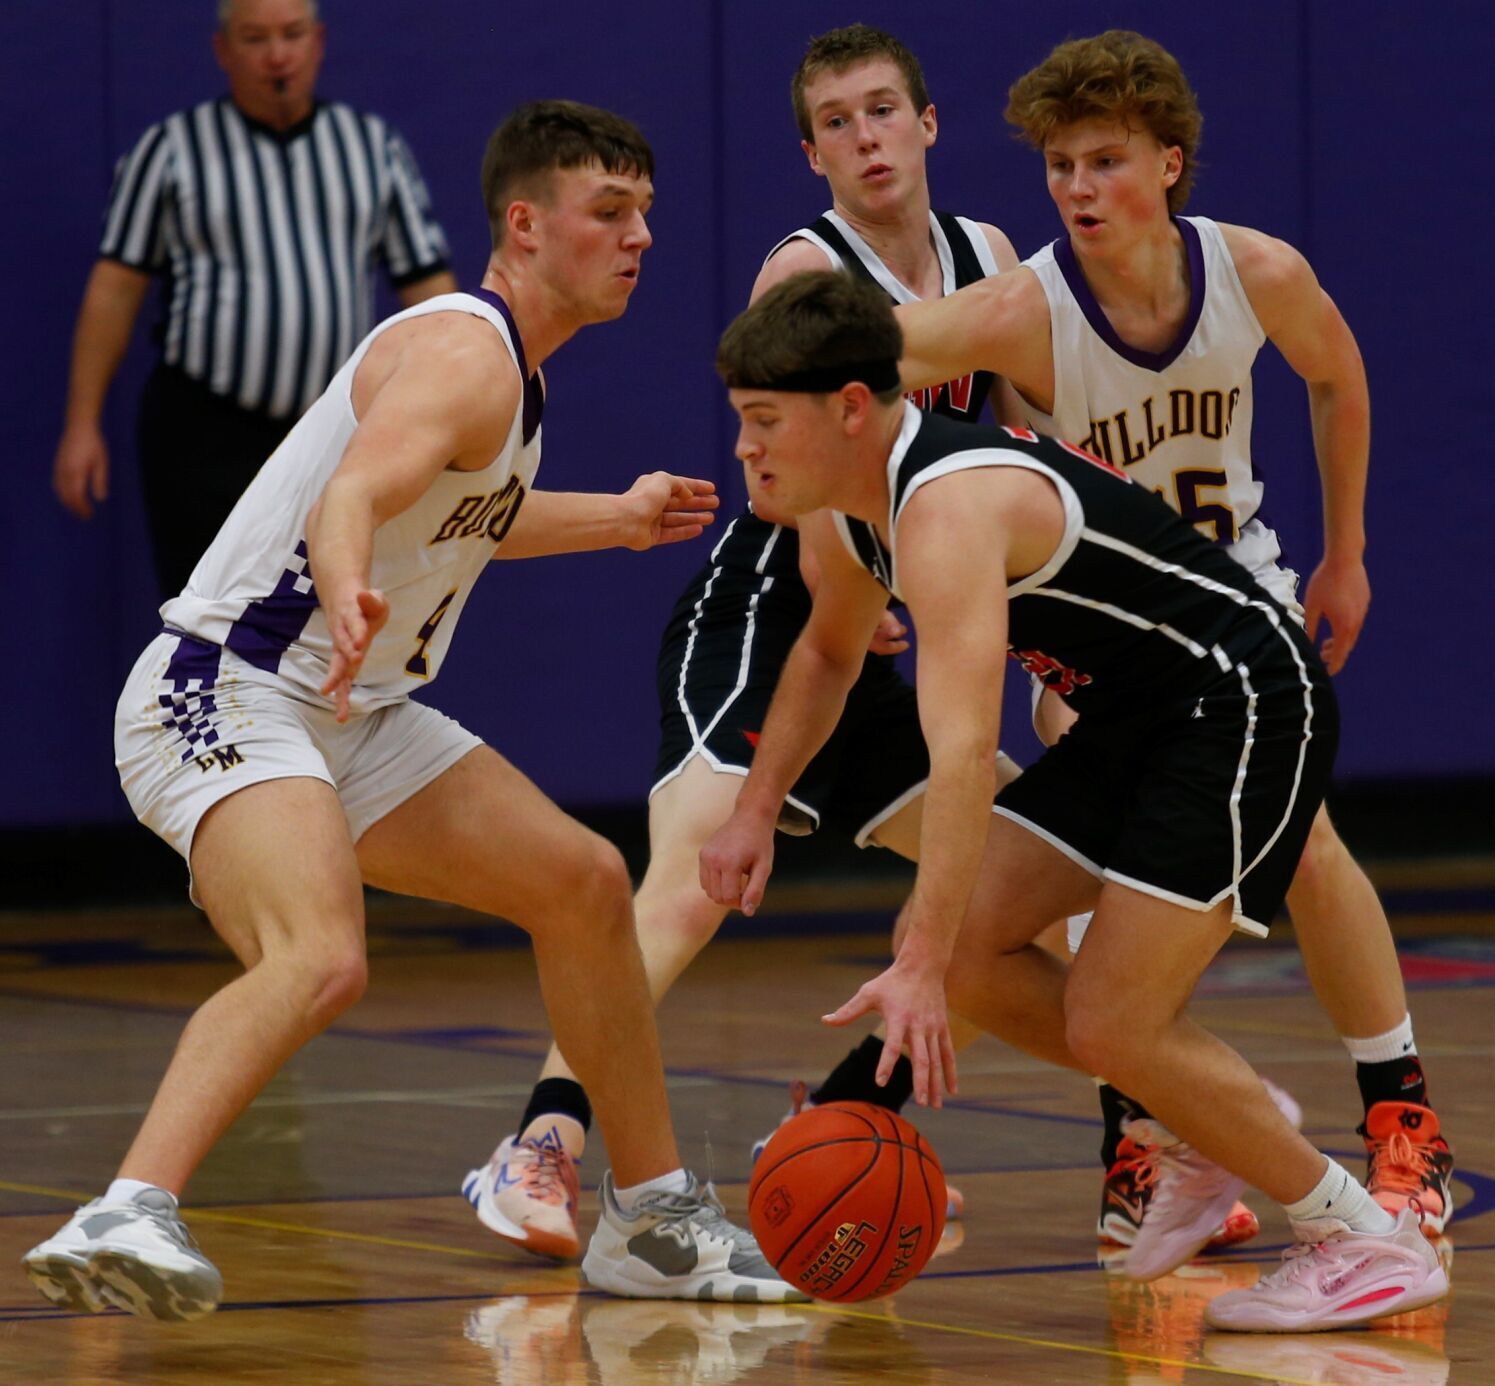 Exciting High School Basketball Season Kicks Off in Iowa: Top Teams and Key Players to Watch